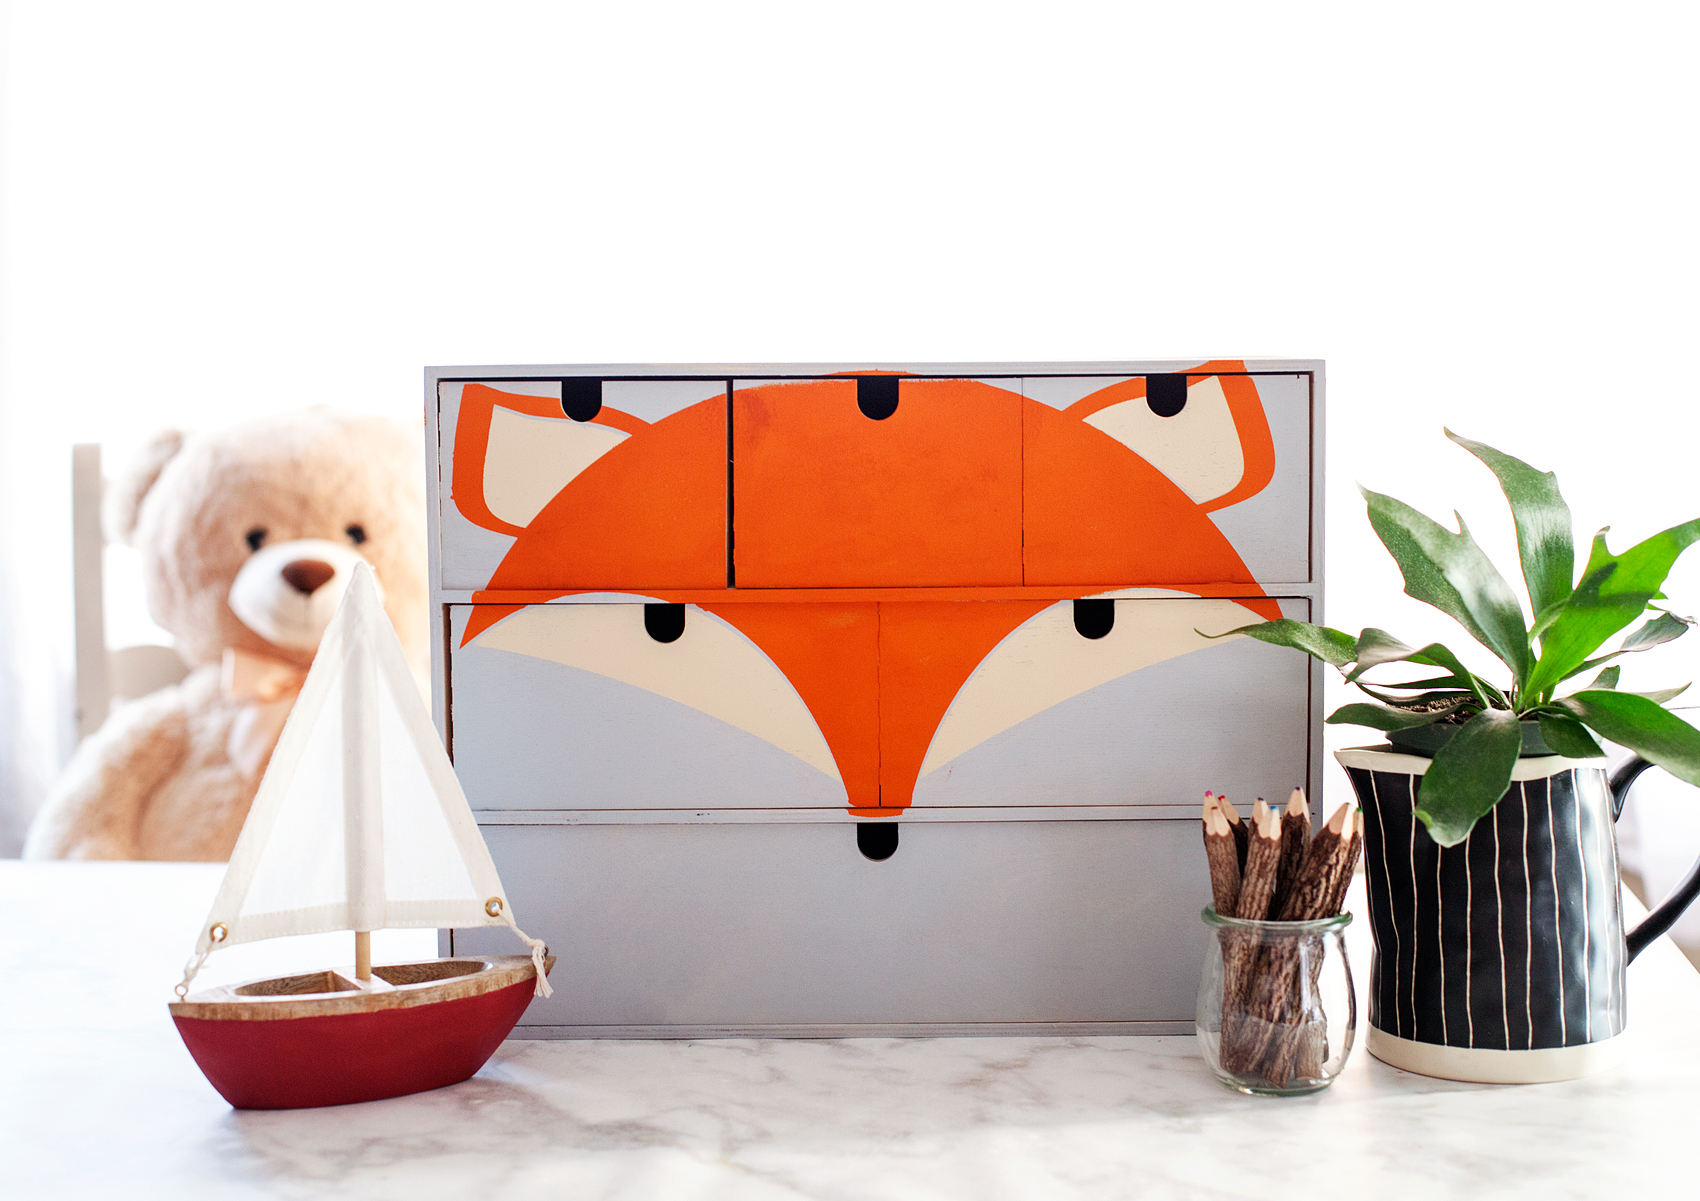 Transform a simple mini storage chest from IKEA into this cute little fox storage chest for your little ones little toys and trinkets. I used some of the @decoart chalky finish paint along with my @cricut Maker to create this fun design for my little boys room • WhipperBerry